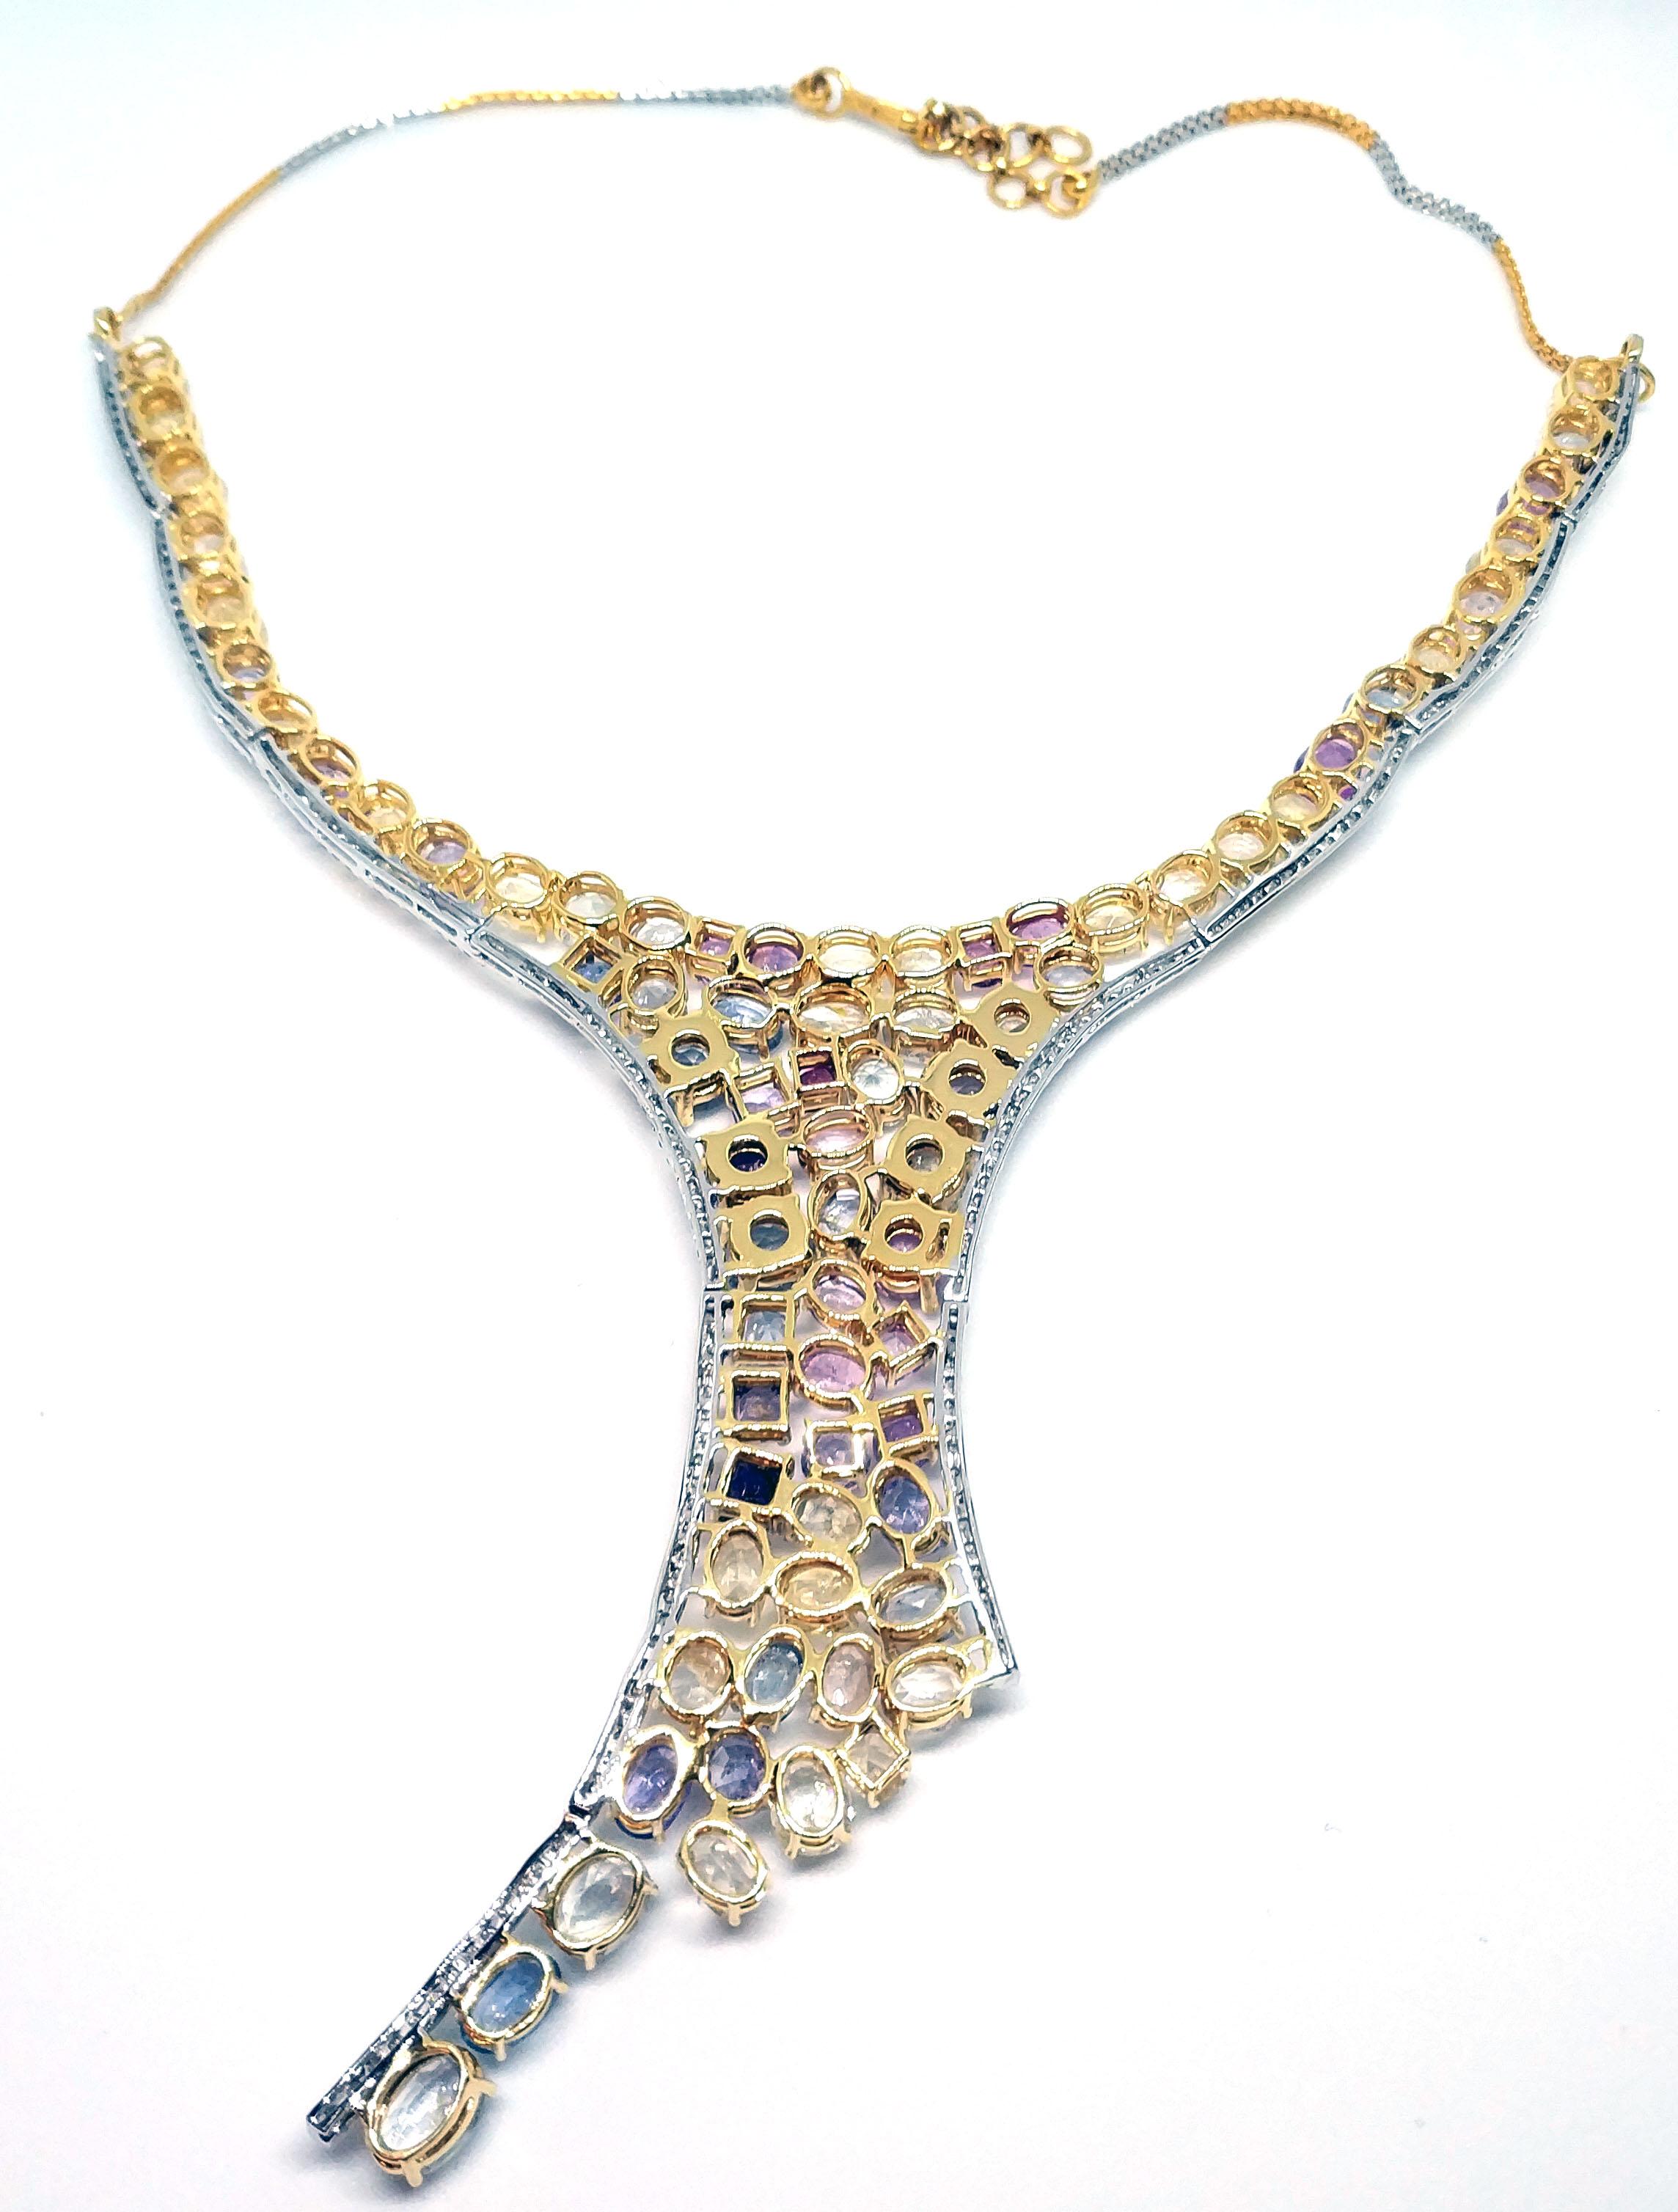 113 Carat Multicolored Sapphire and Diamond Necklace in Hourglass Design For Sale 3